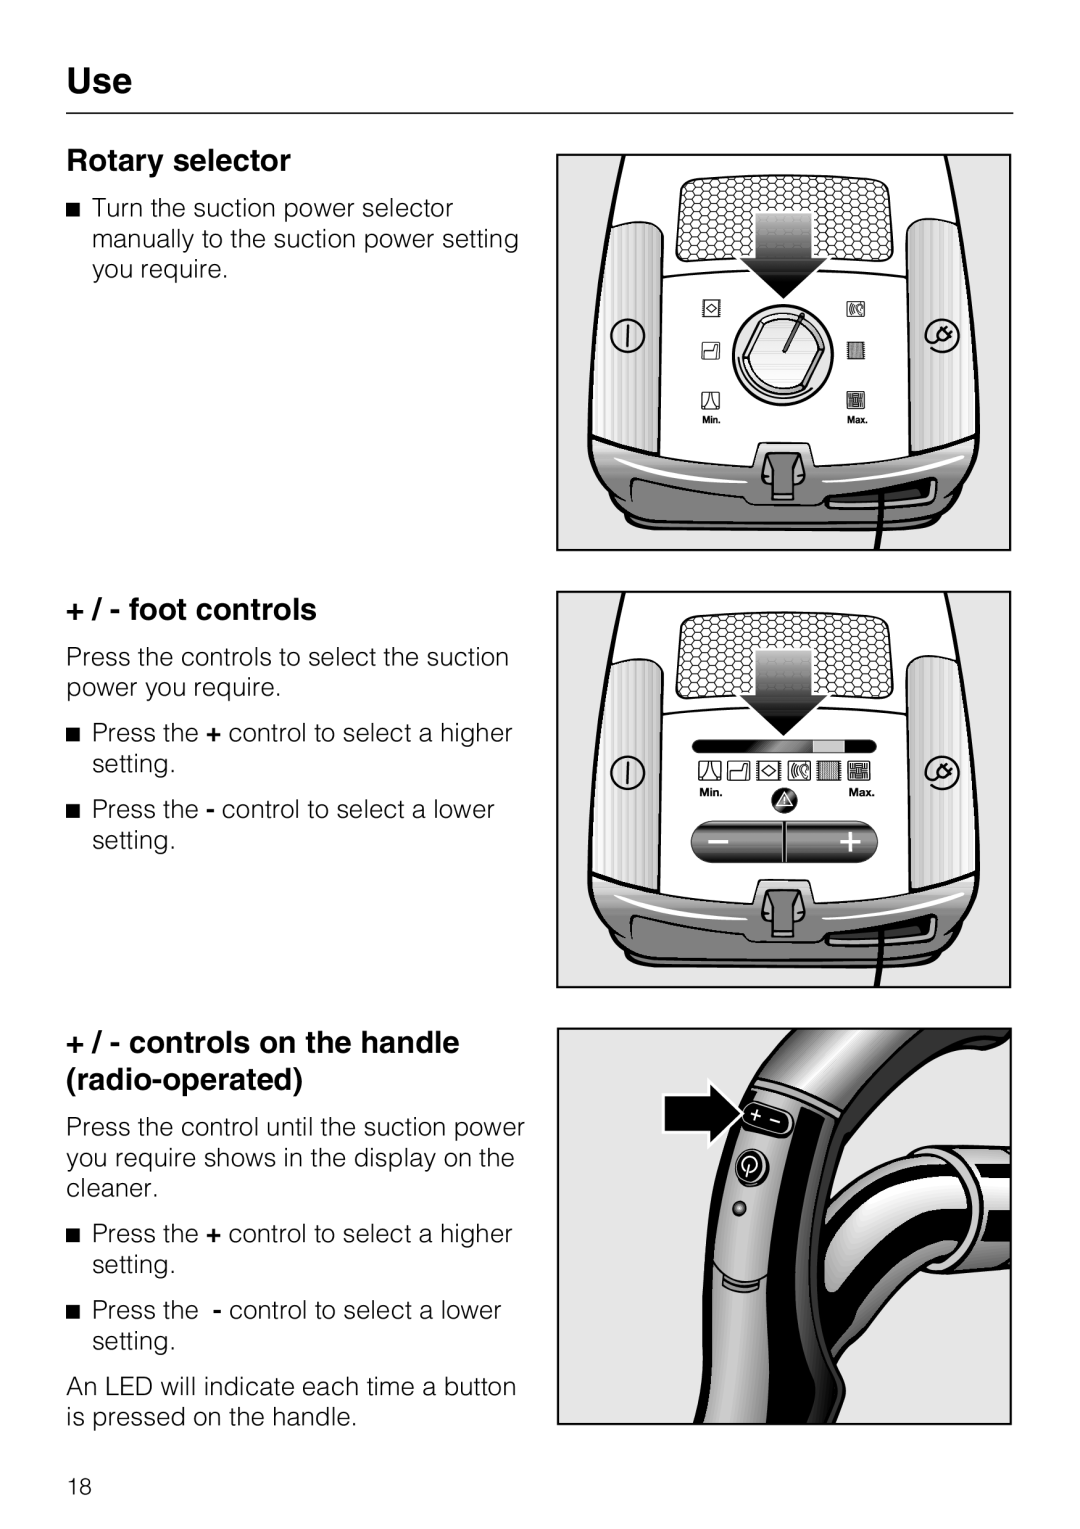 Miele S4212 manual Rotary selector, + / - foot controls, +/ - controls on the handle radio-operated 